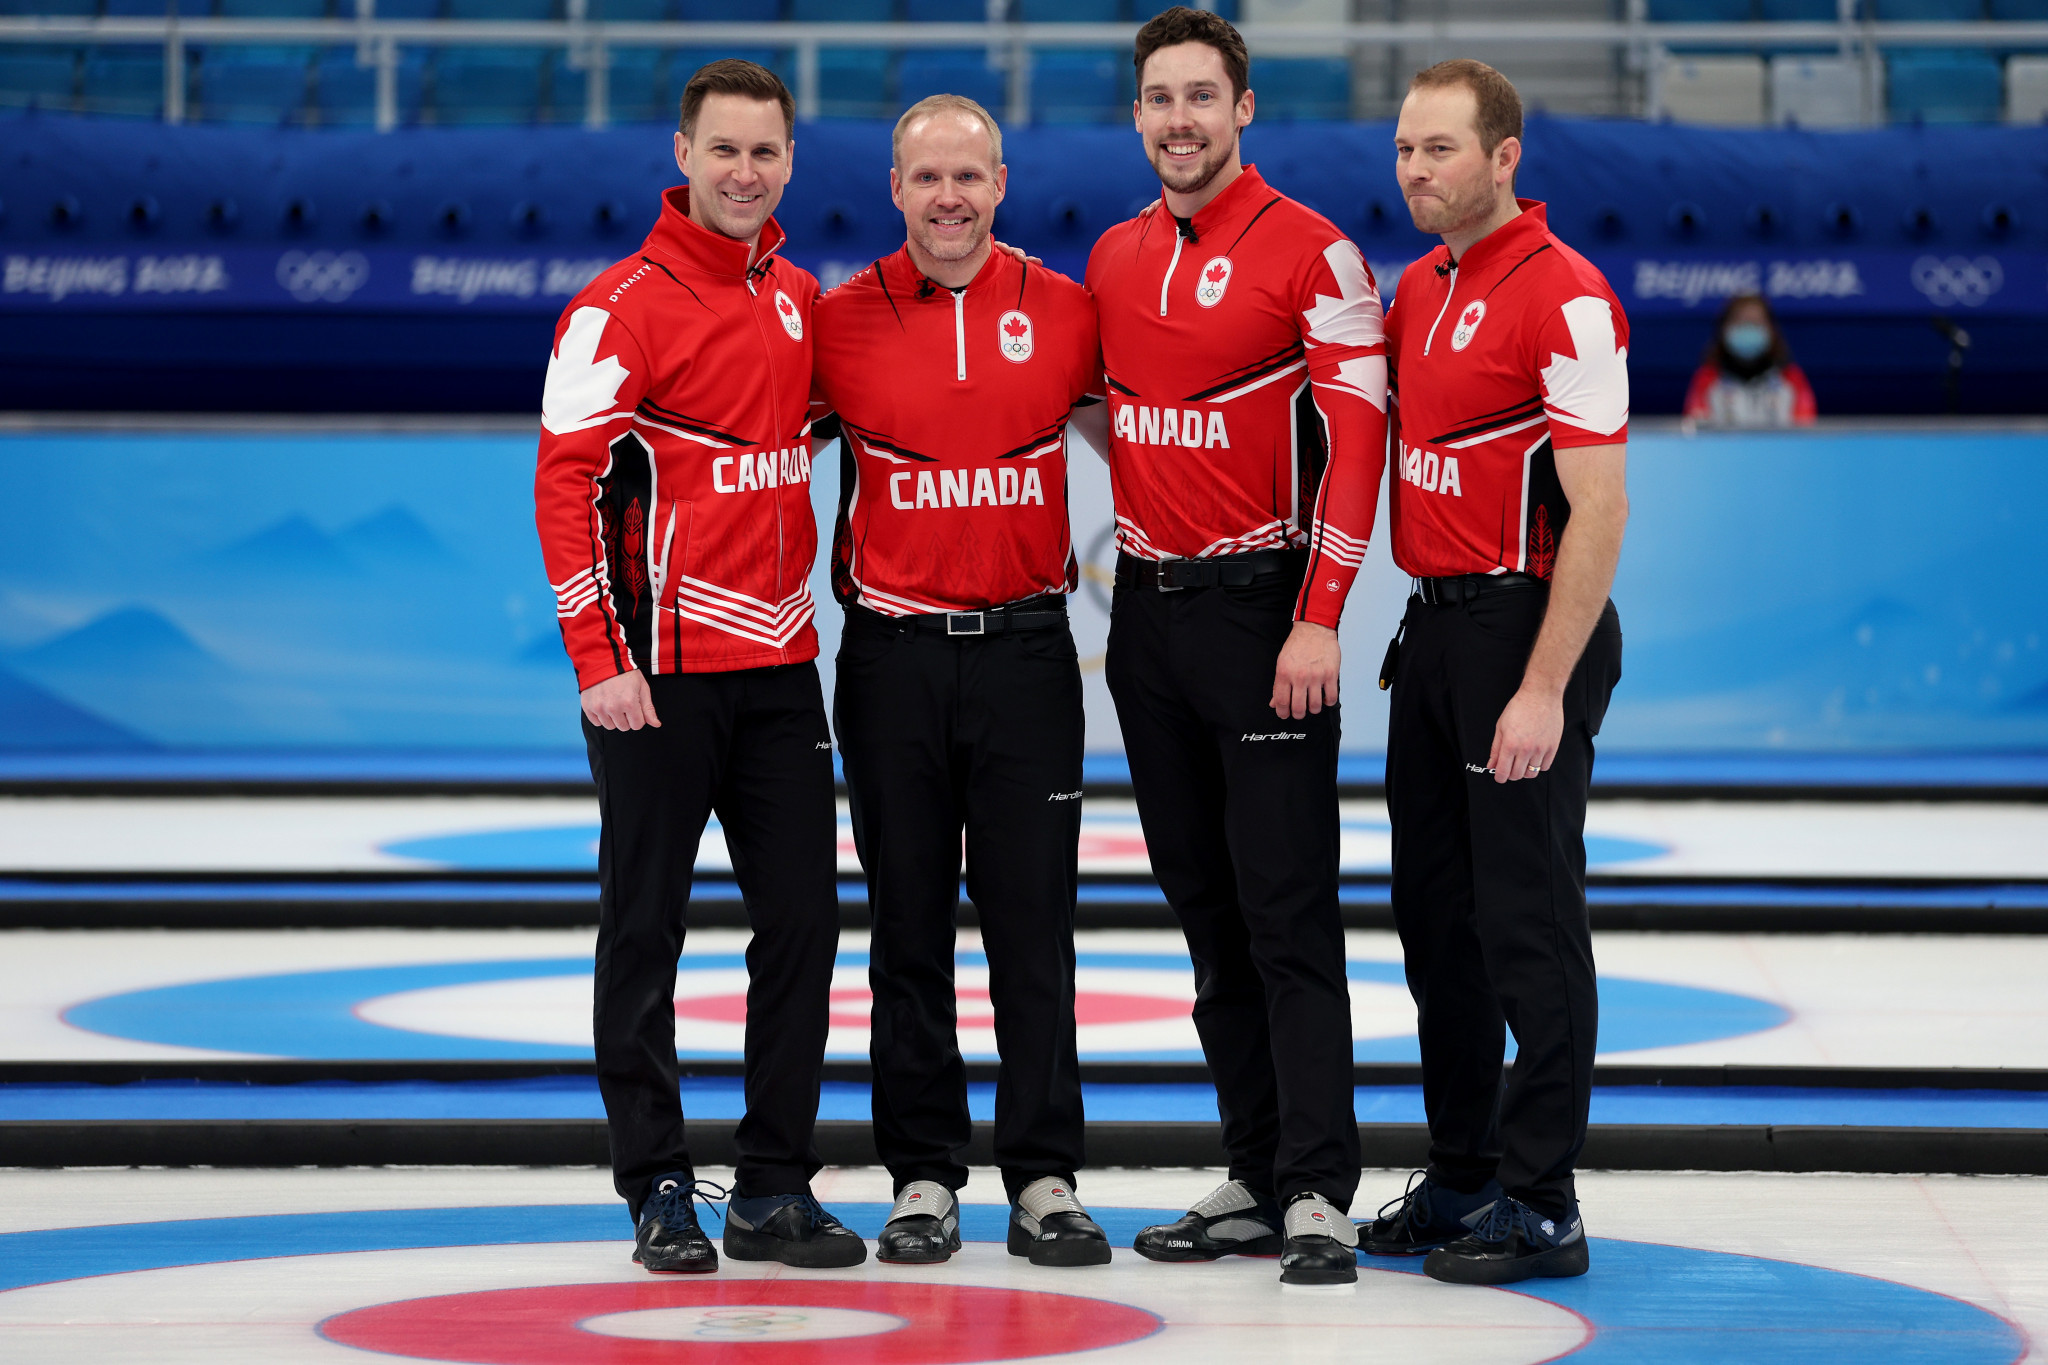 Team Brad Gushue won the men's curling Champions Cup title in Olds ©Getty Images